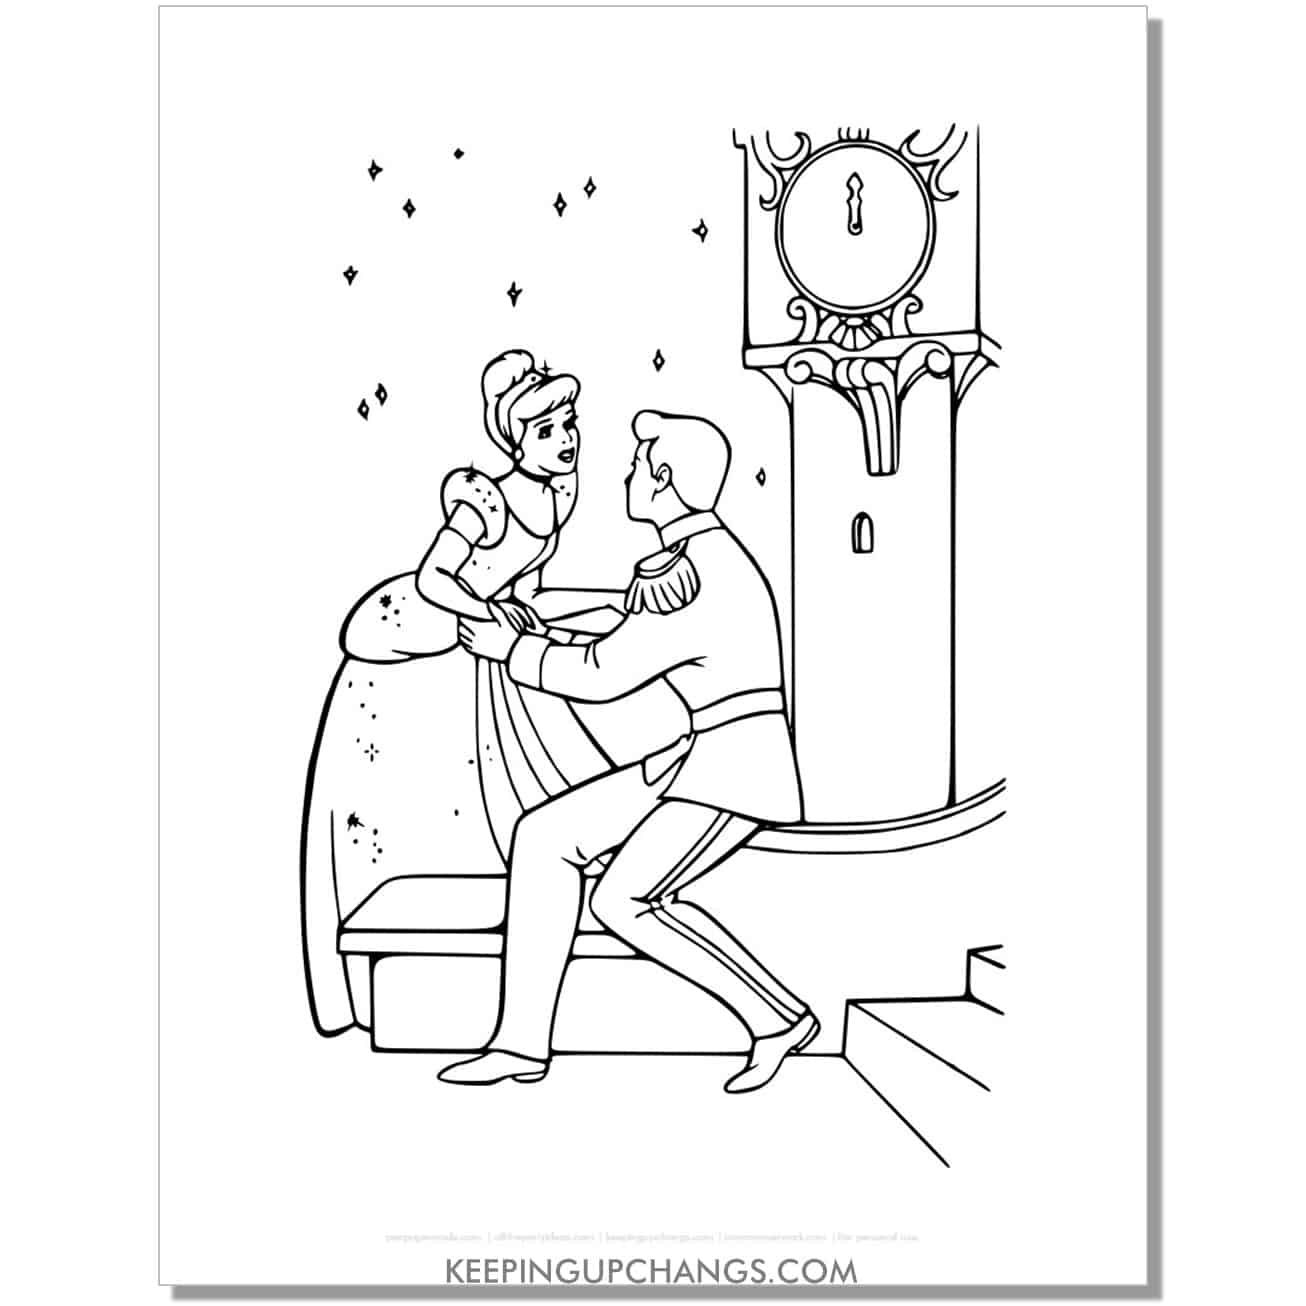 cinderella must leave prince charming by midnight coloring page, sheet.